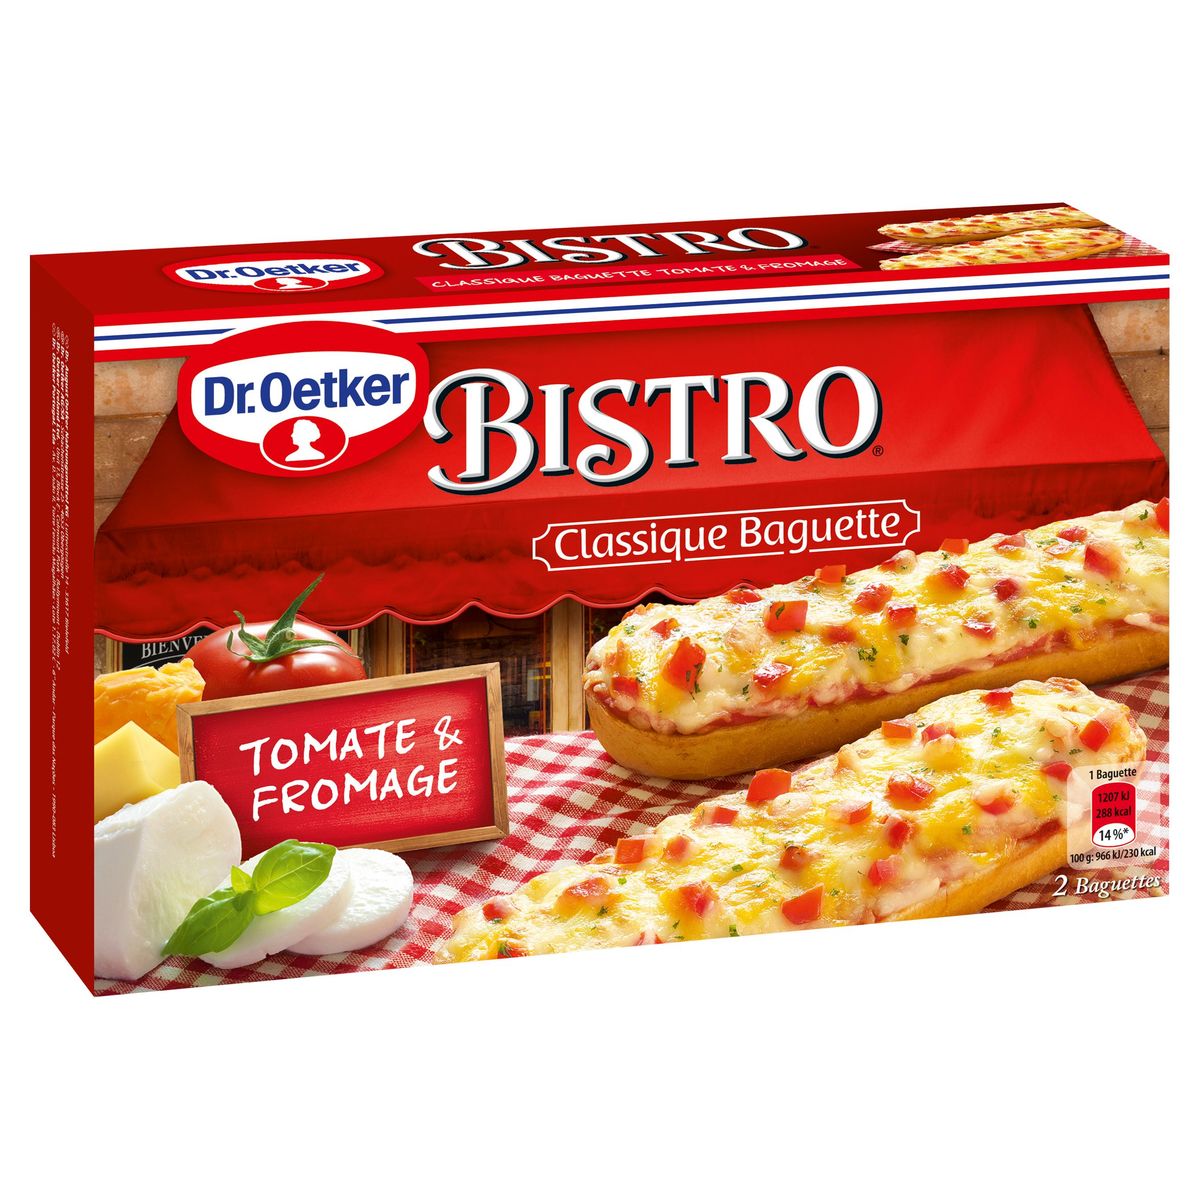 Dr. Oetker Bistro 2 x Site Fromage & Baguette | Tomate g Carrefour 125